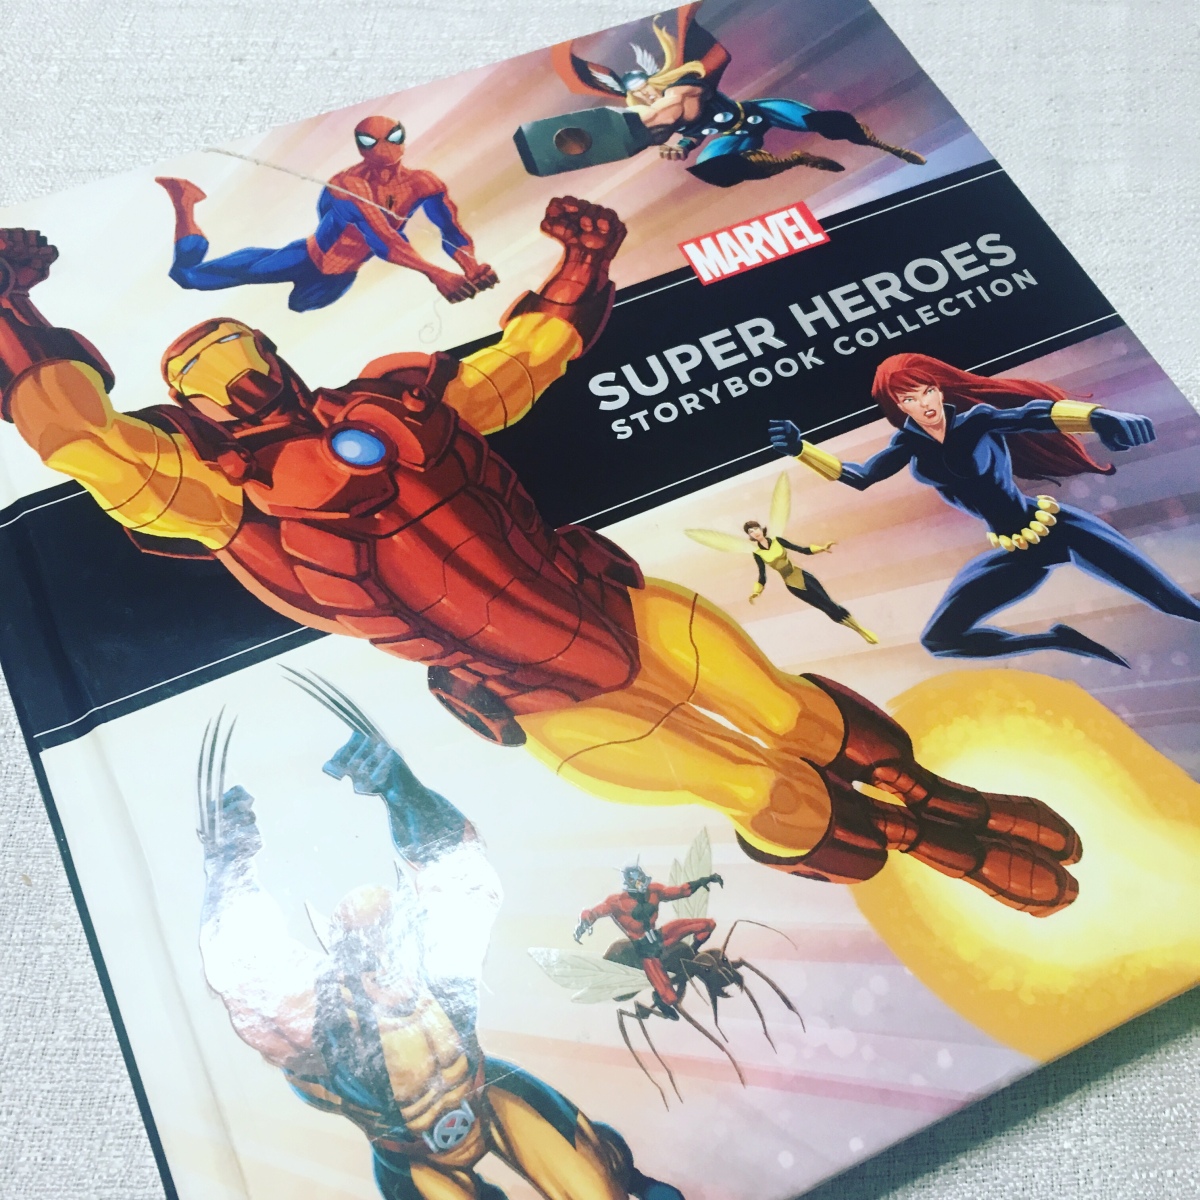 Origin stories in the Marvel Super Heroes Storybook Collection